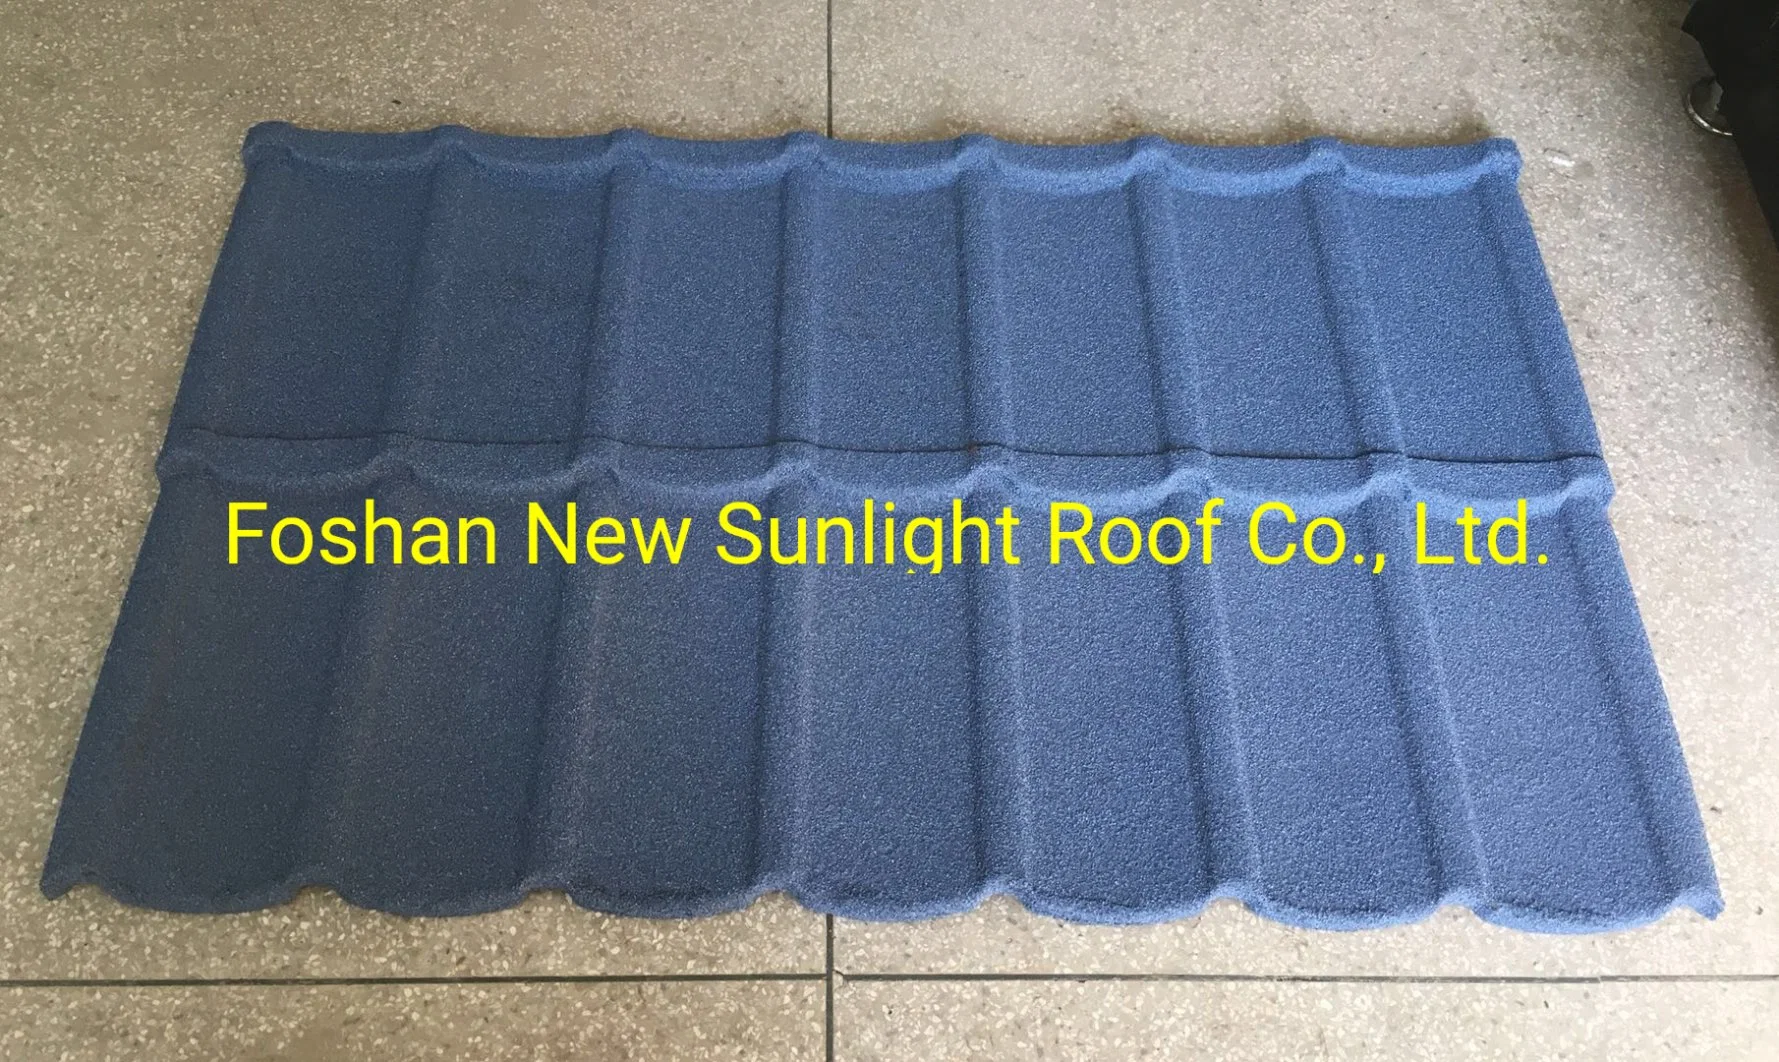 Construction Material Stone Coated Steel China Roofing Tile